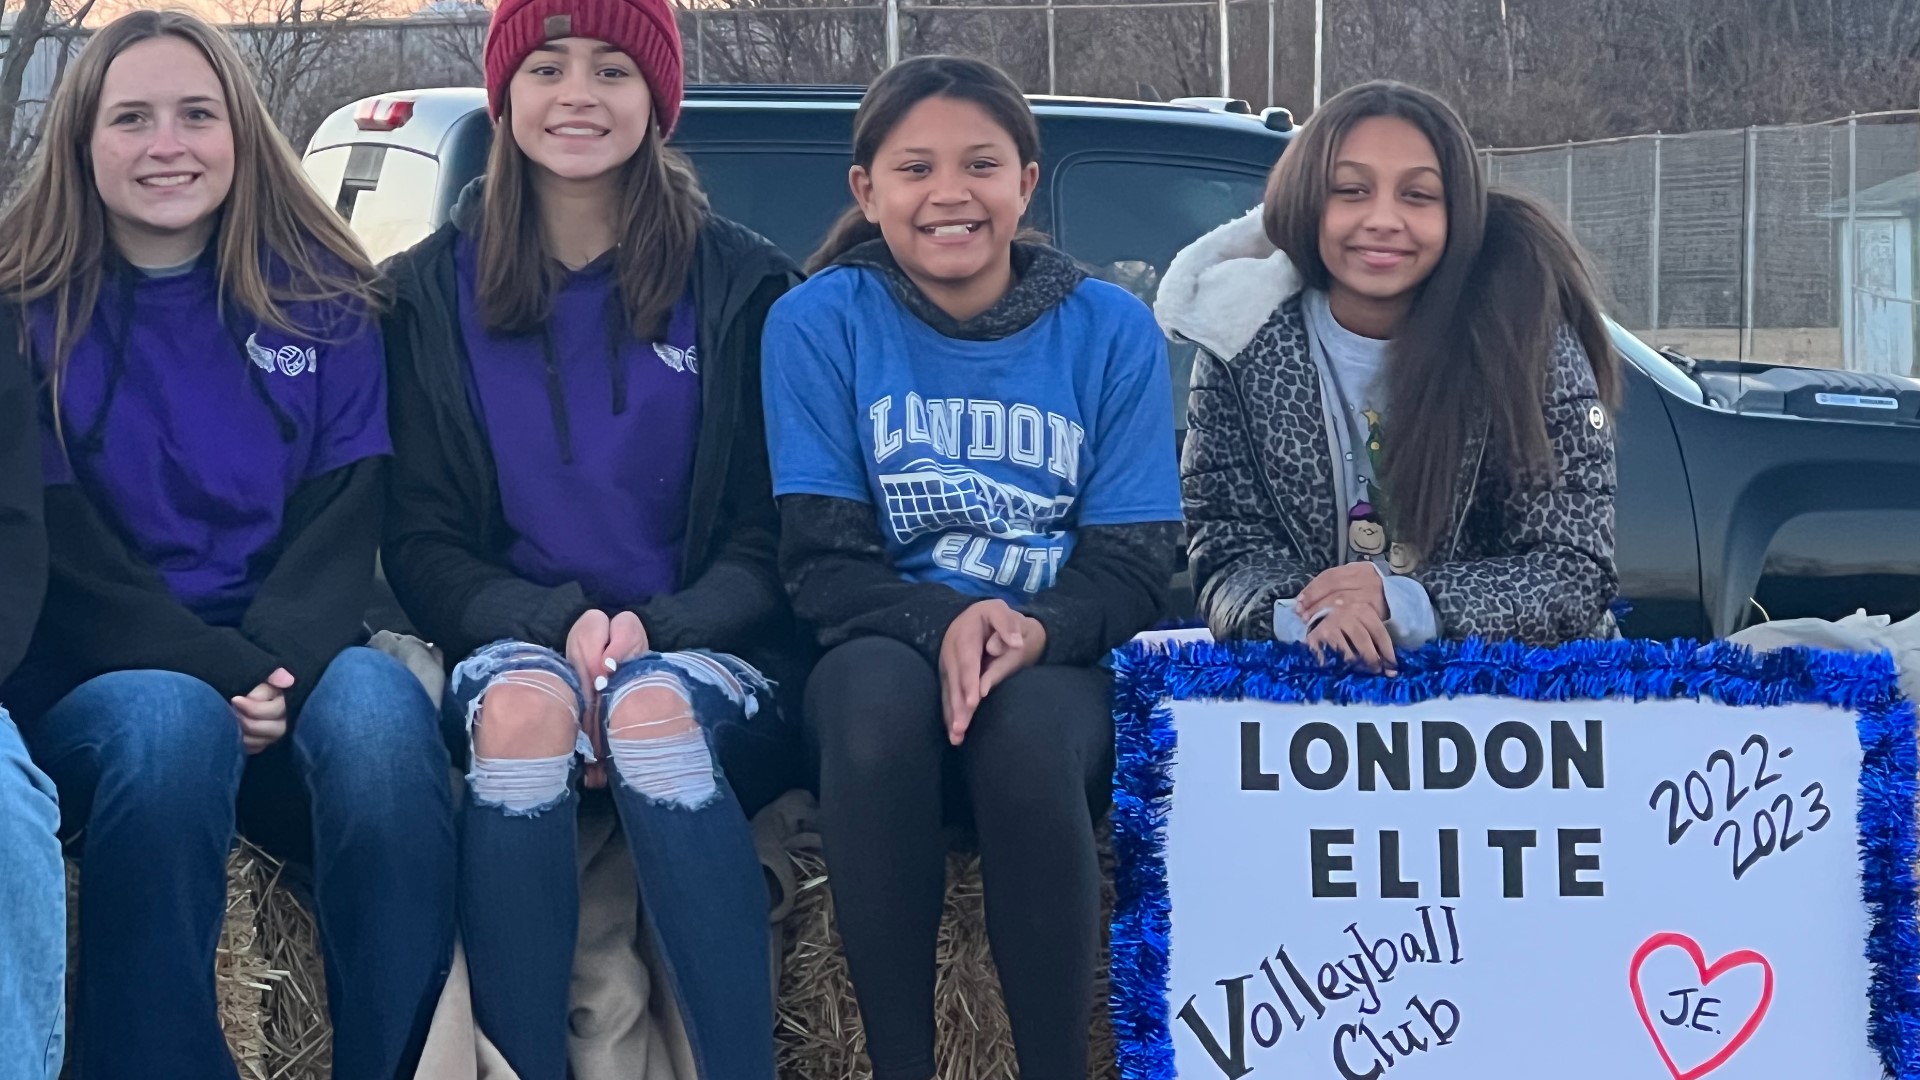 The London Elite Volleyball Club community wore purple shirt with wings and the initials J.E. in Jessica’s honor, with a bible verse of courage.